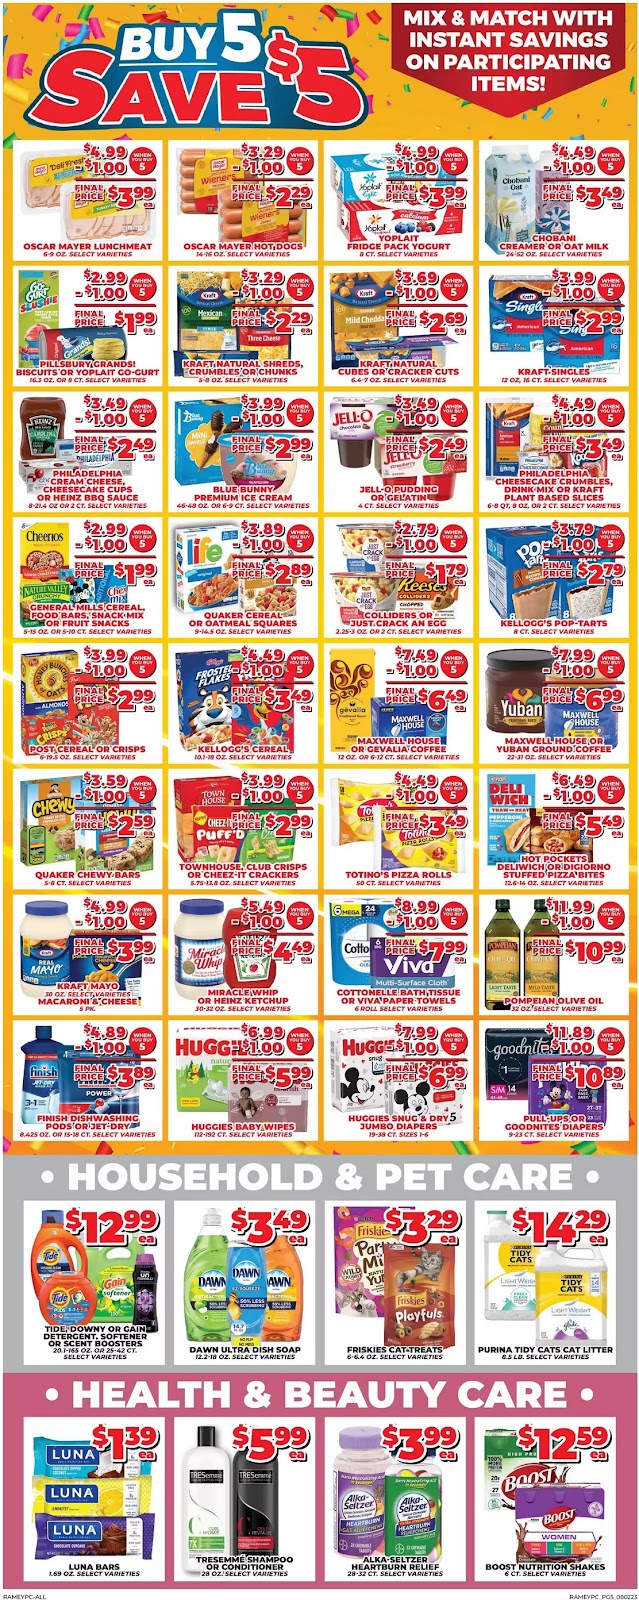 Price Cutter Weekly Ad - 5